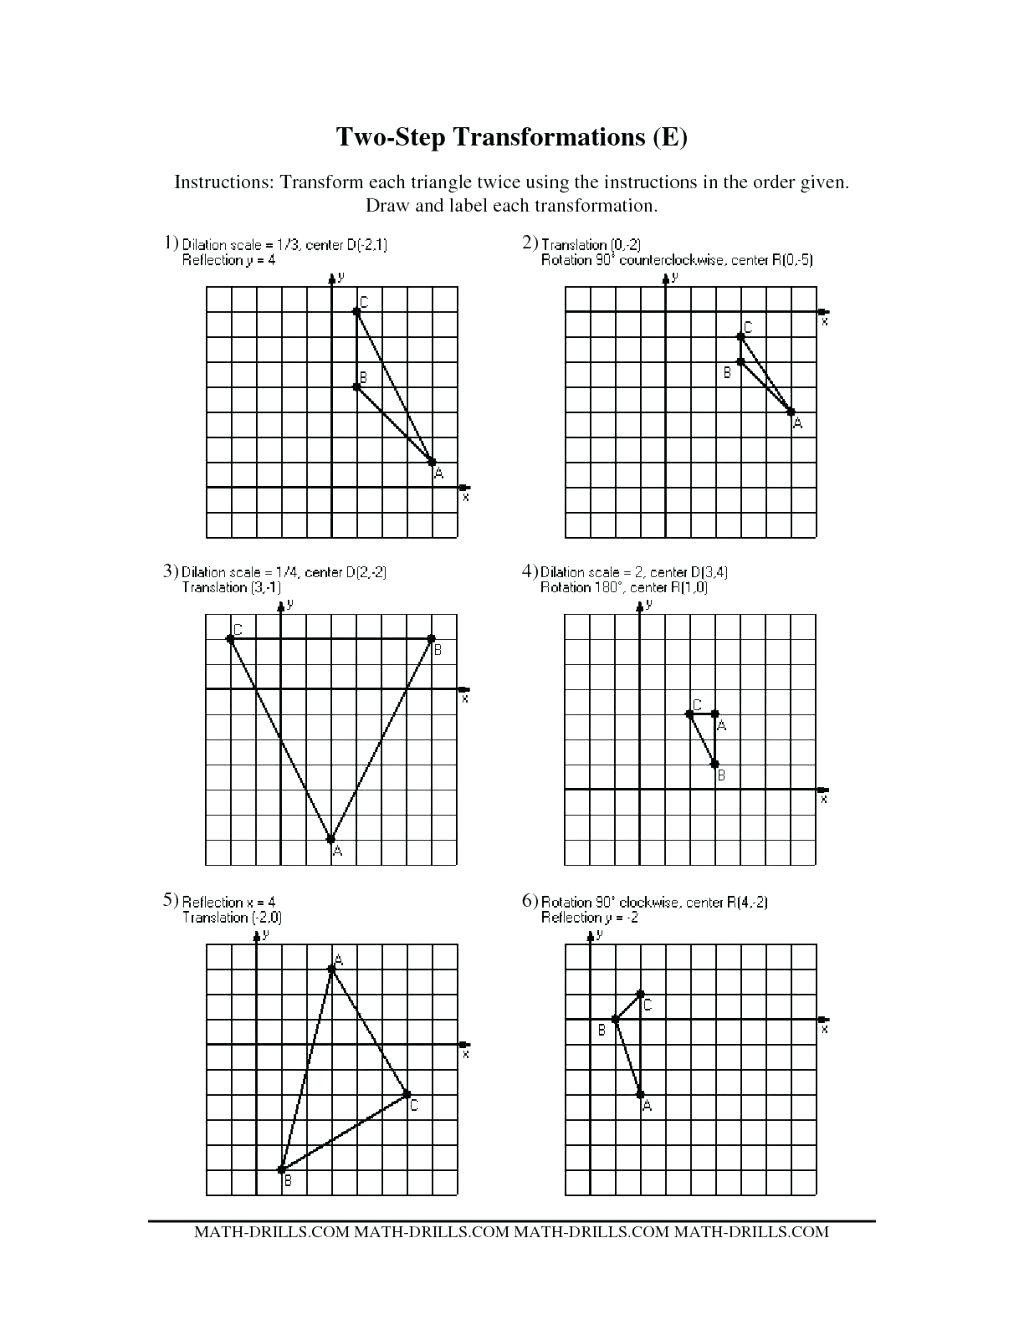 Geometry Transformation Composition Worksheet Answers Geometry Transformation Position Worksheet Answers